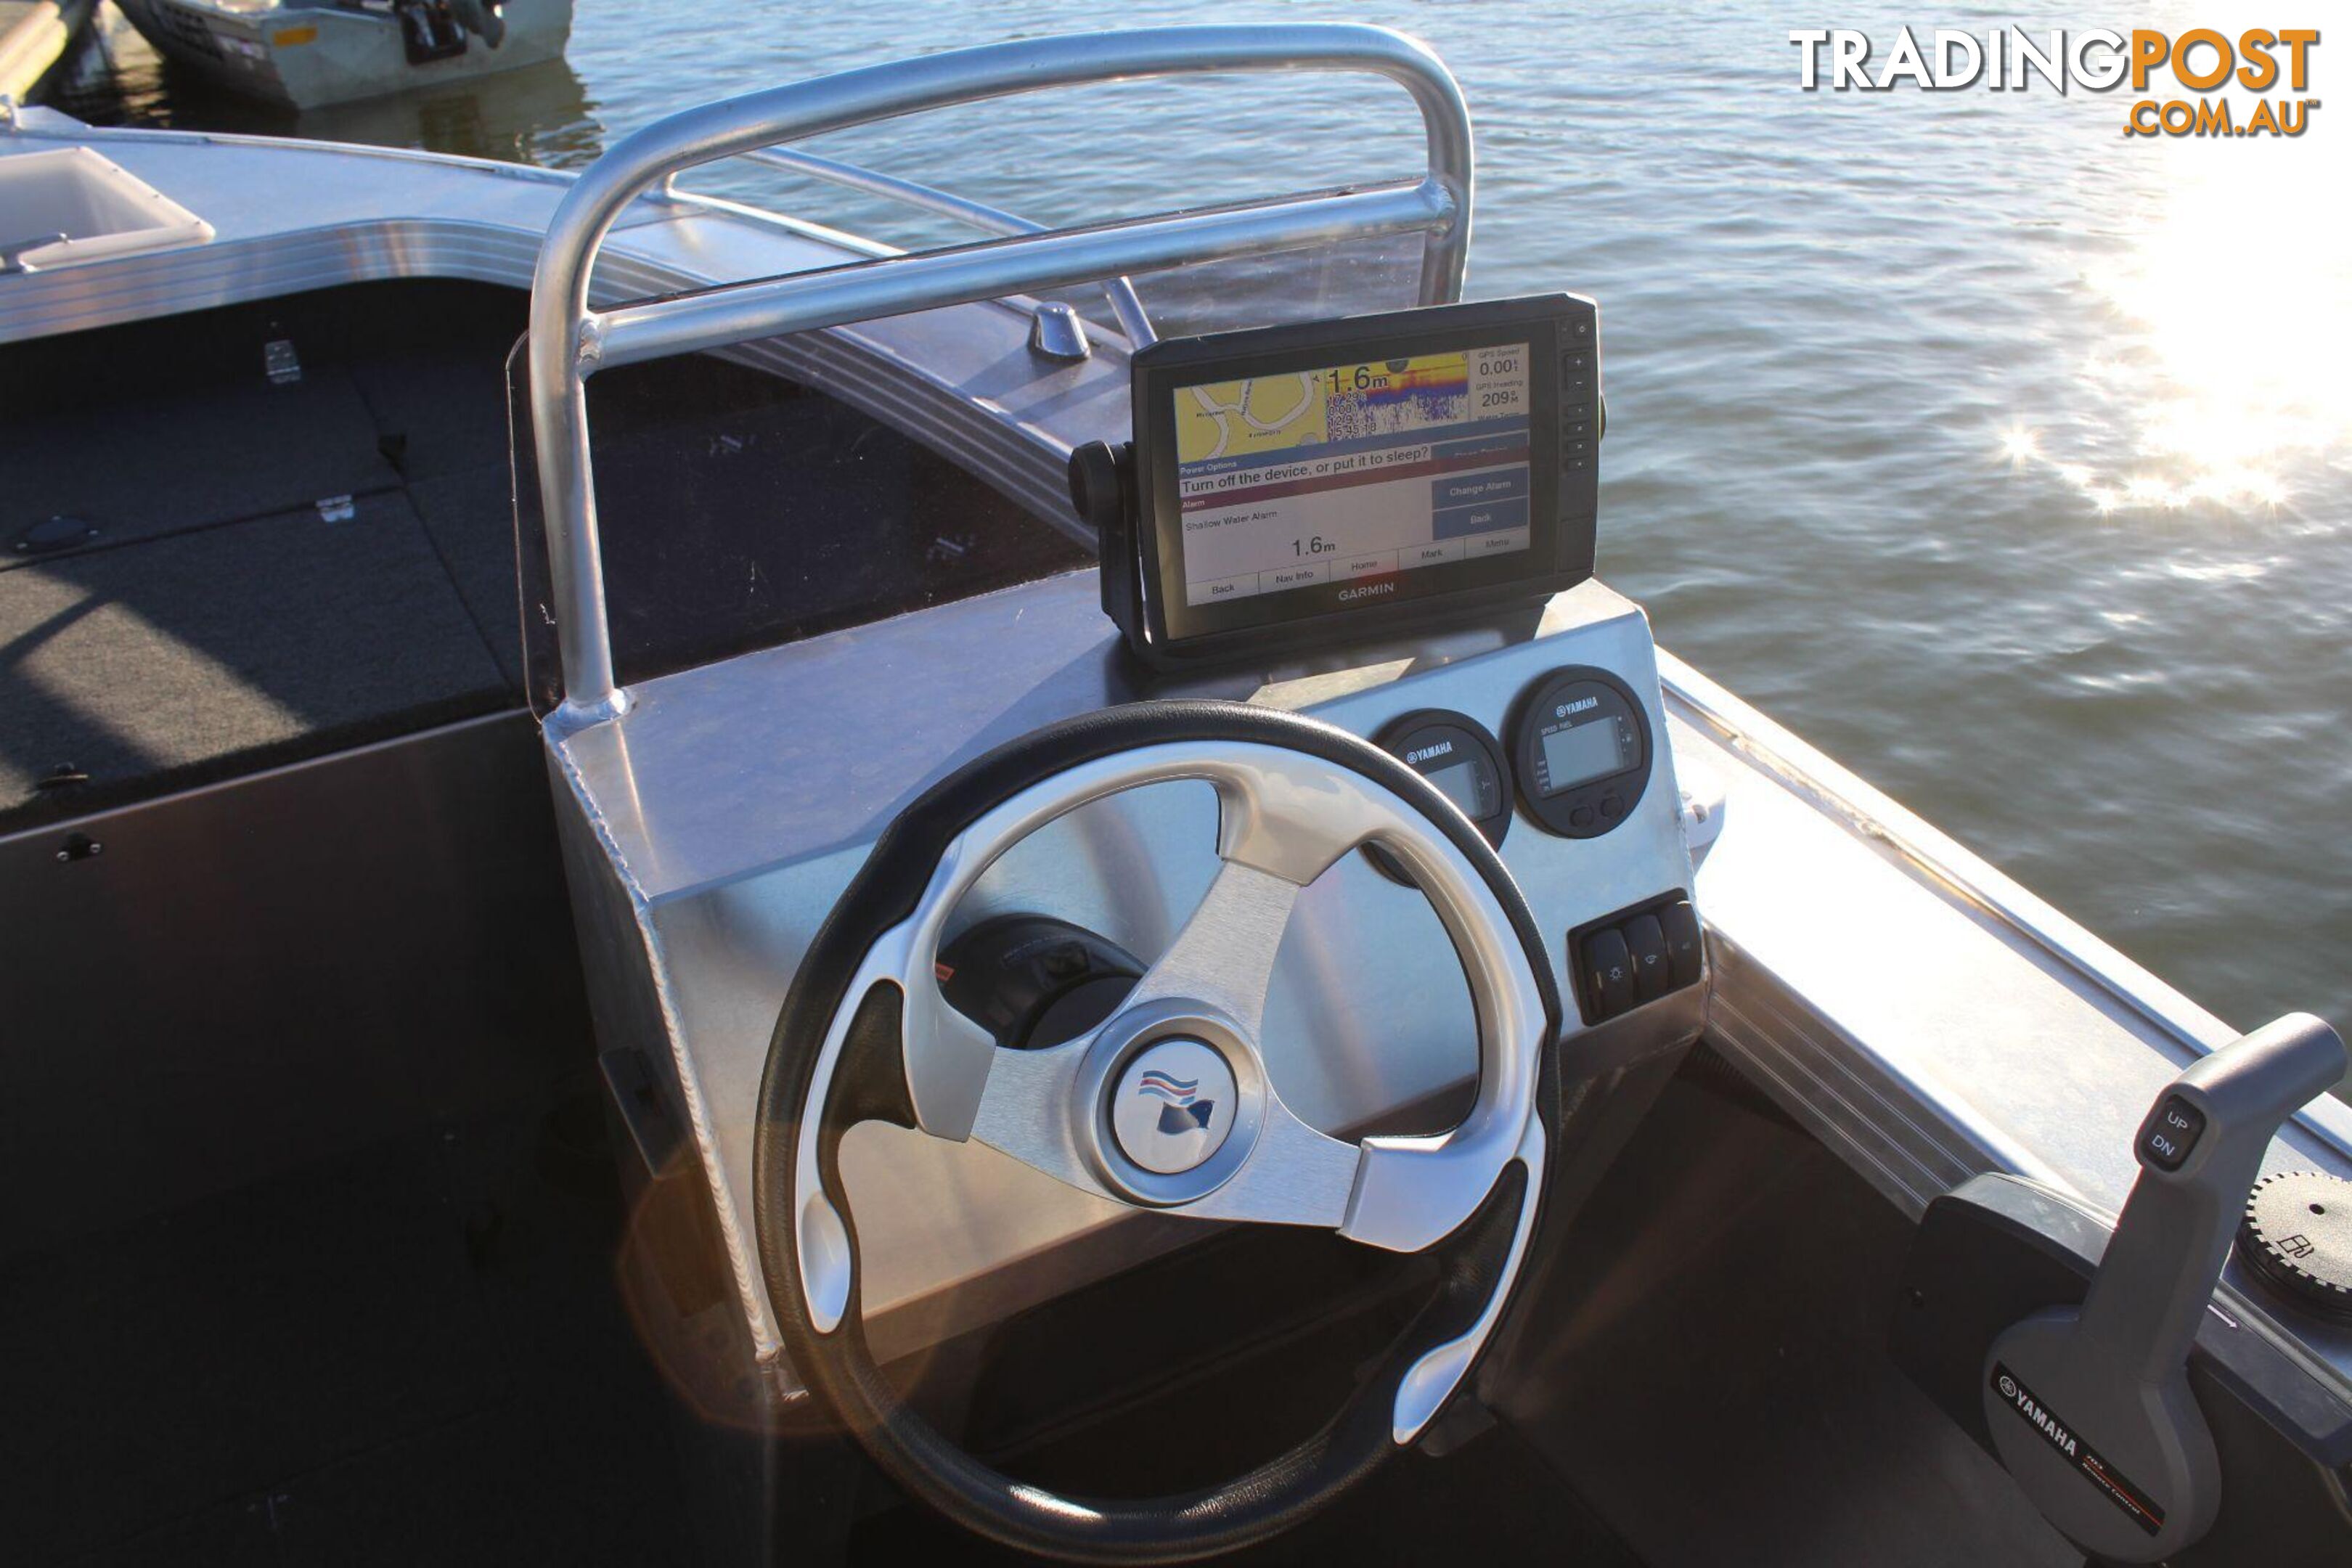 Quintrex 490 Renegade SC(Side Console) + Yamaha F75hp 4-Stroke - Pack 2 for sale online prices